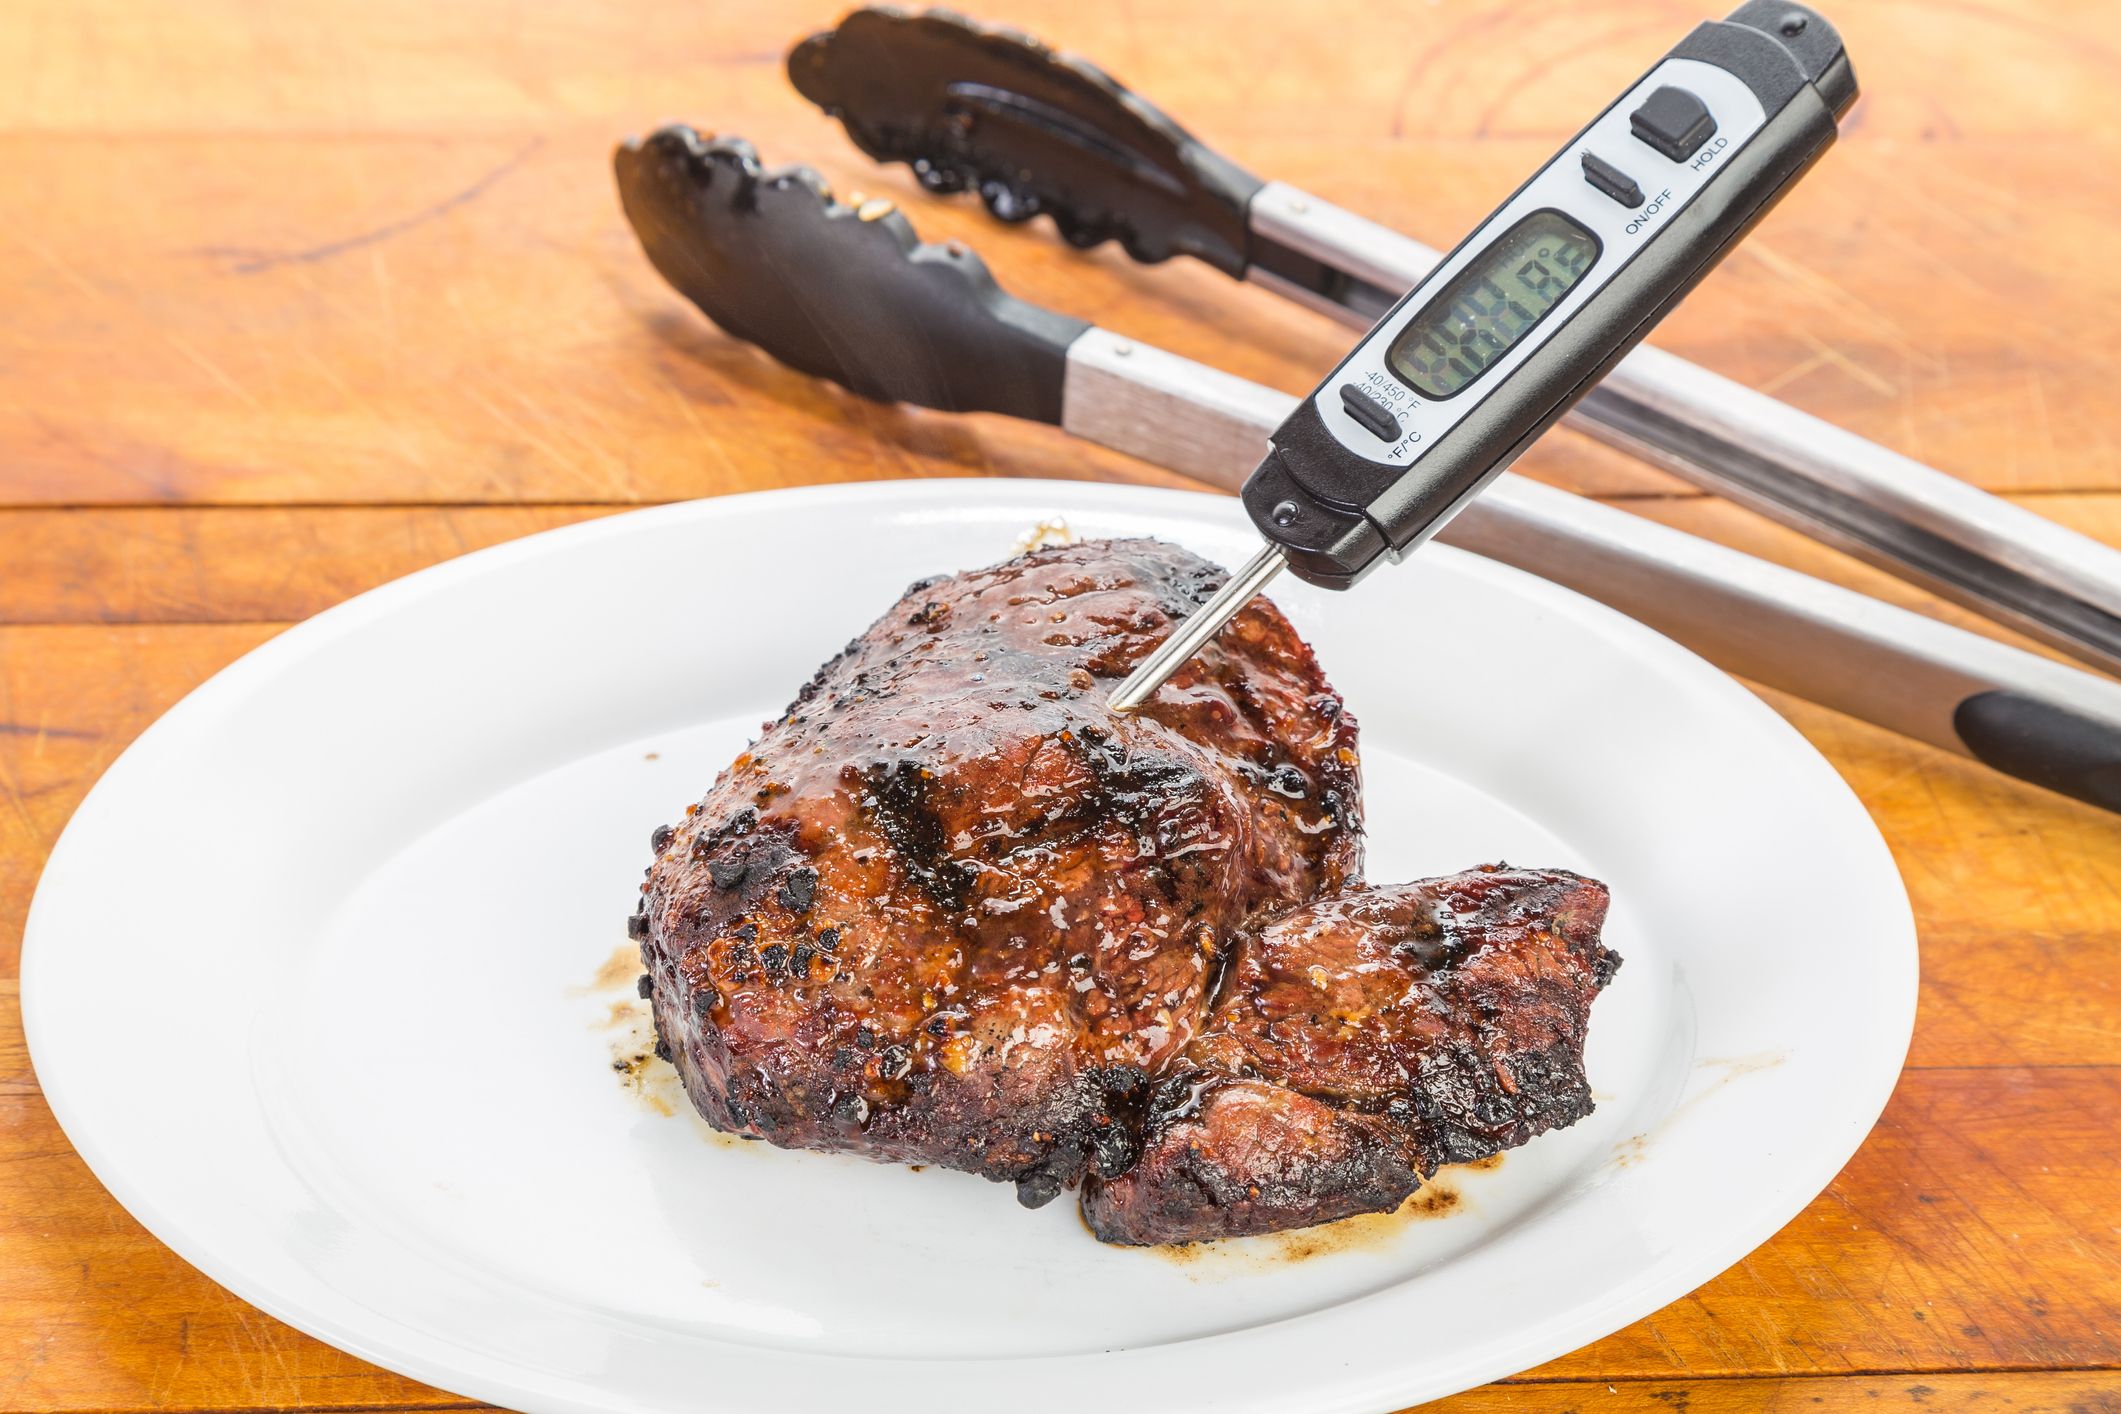 How to Use a Meat Thermometer the Right Way